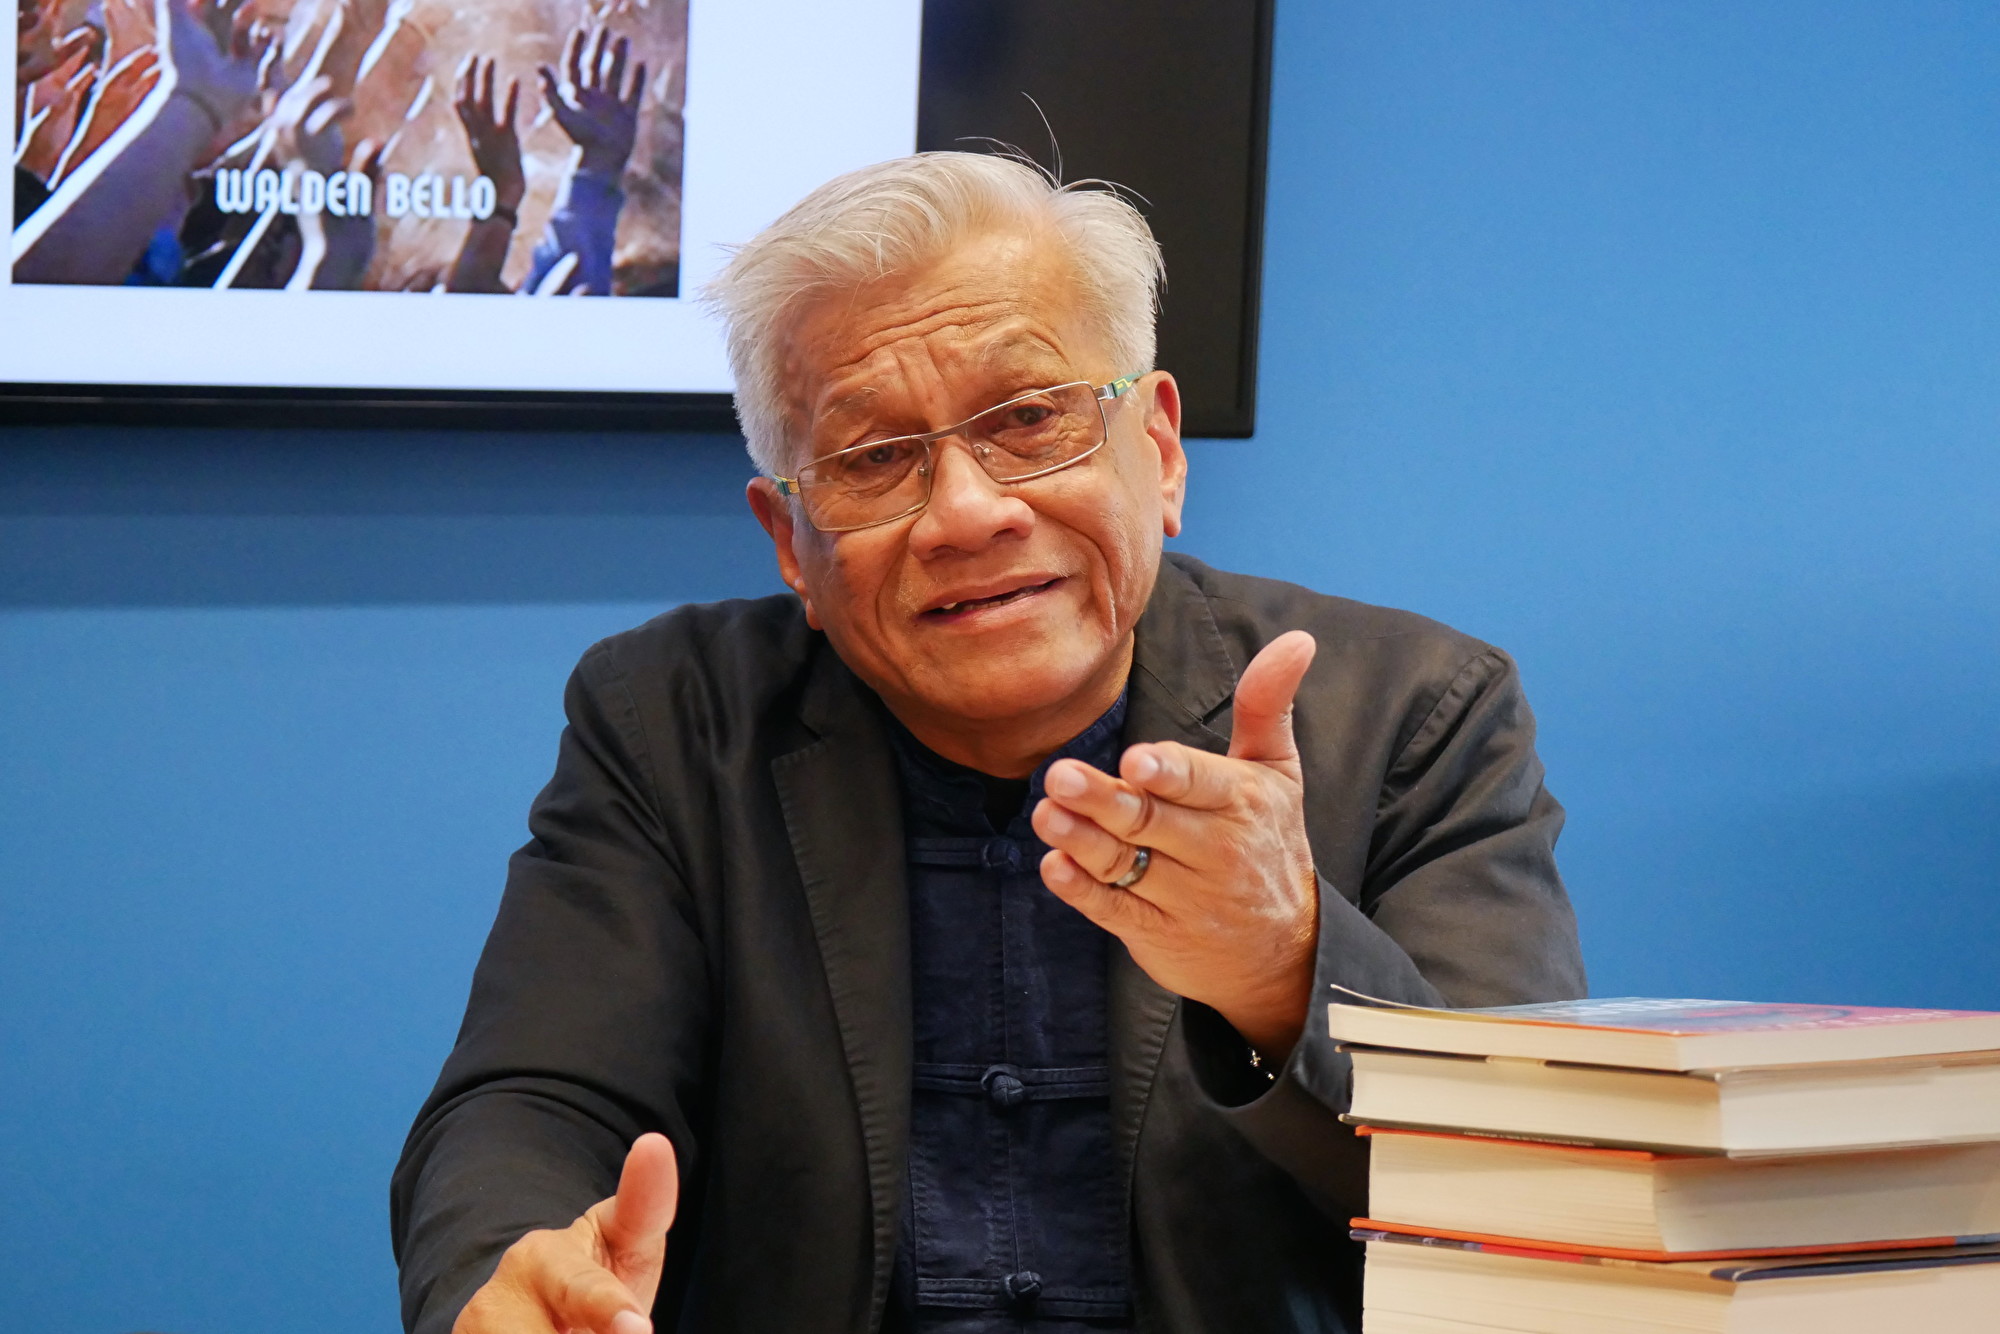 Walden Bello with his books